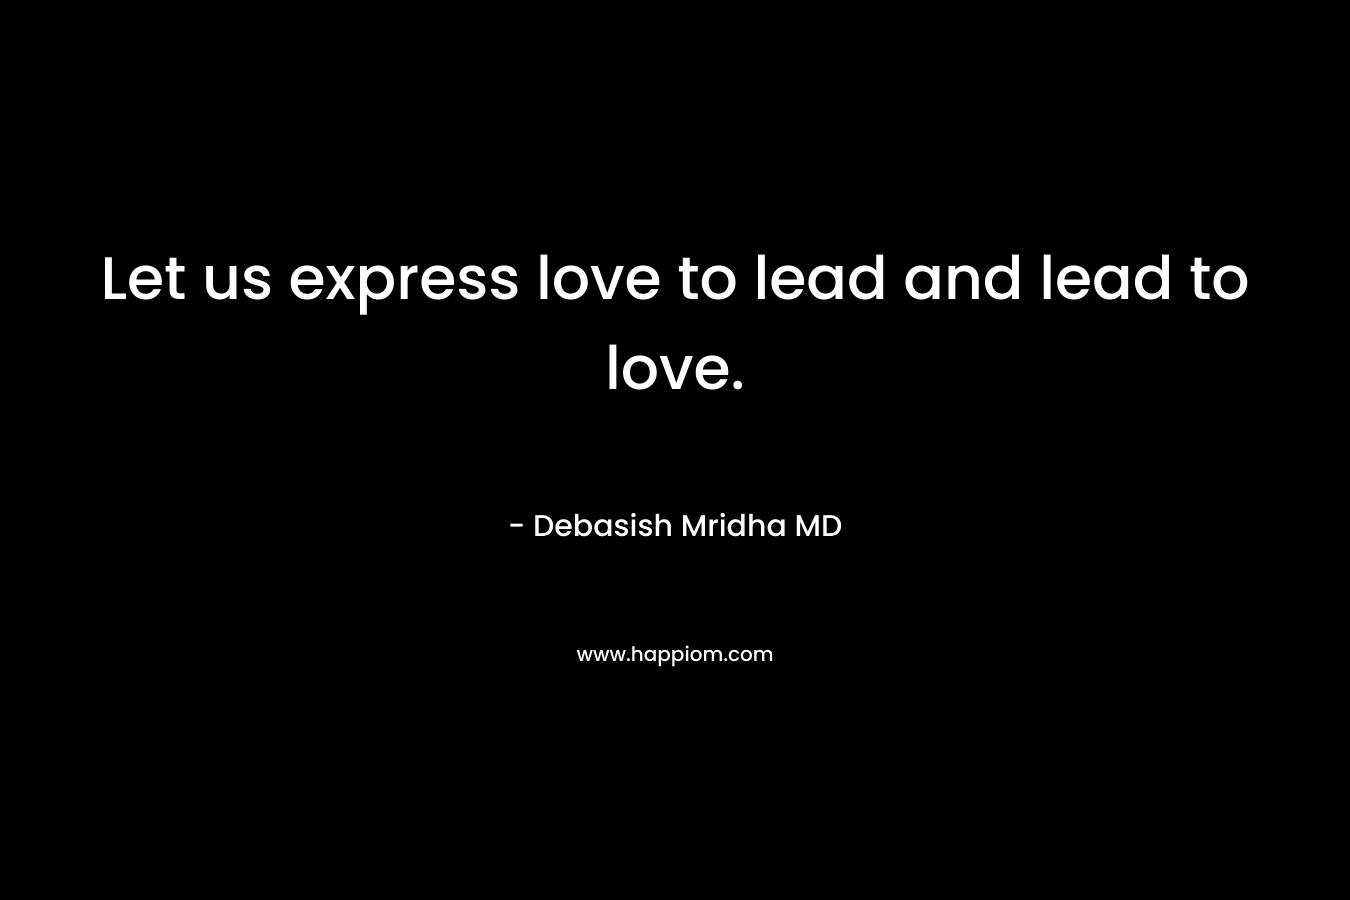 Let us express love to lead and lead to love.